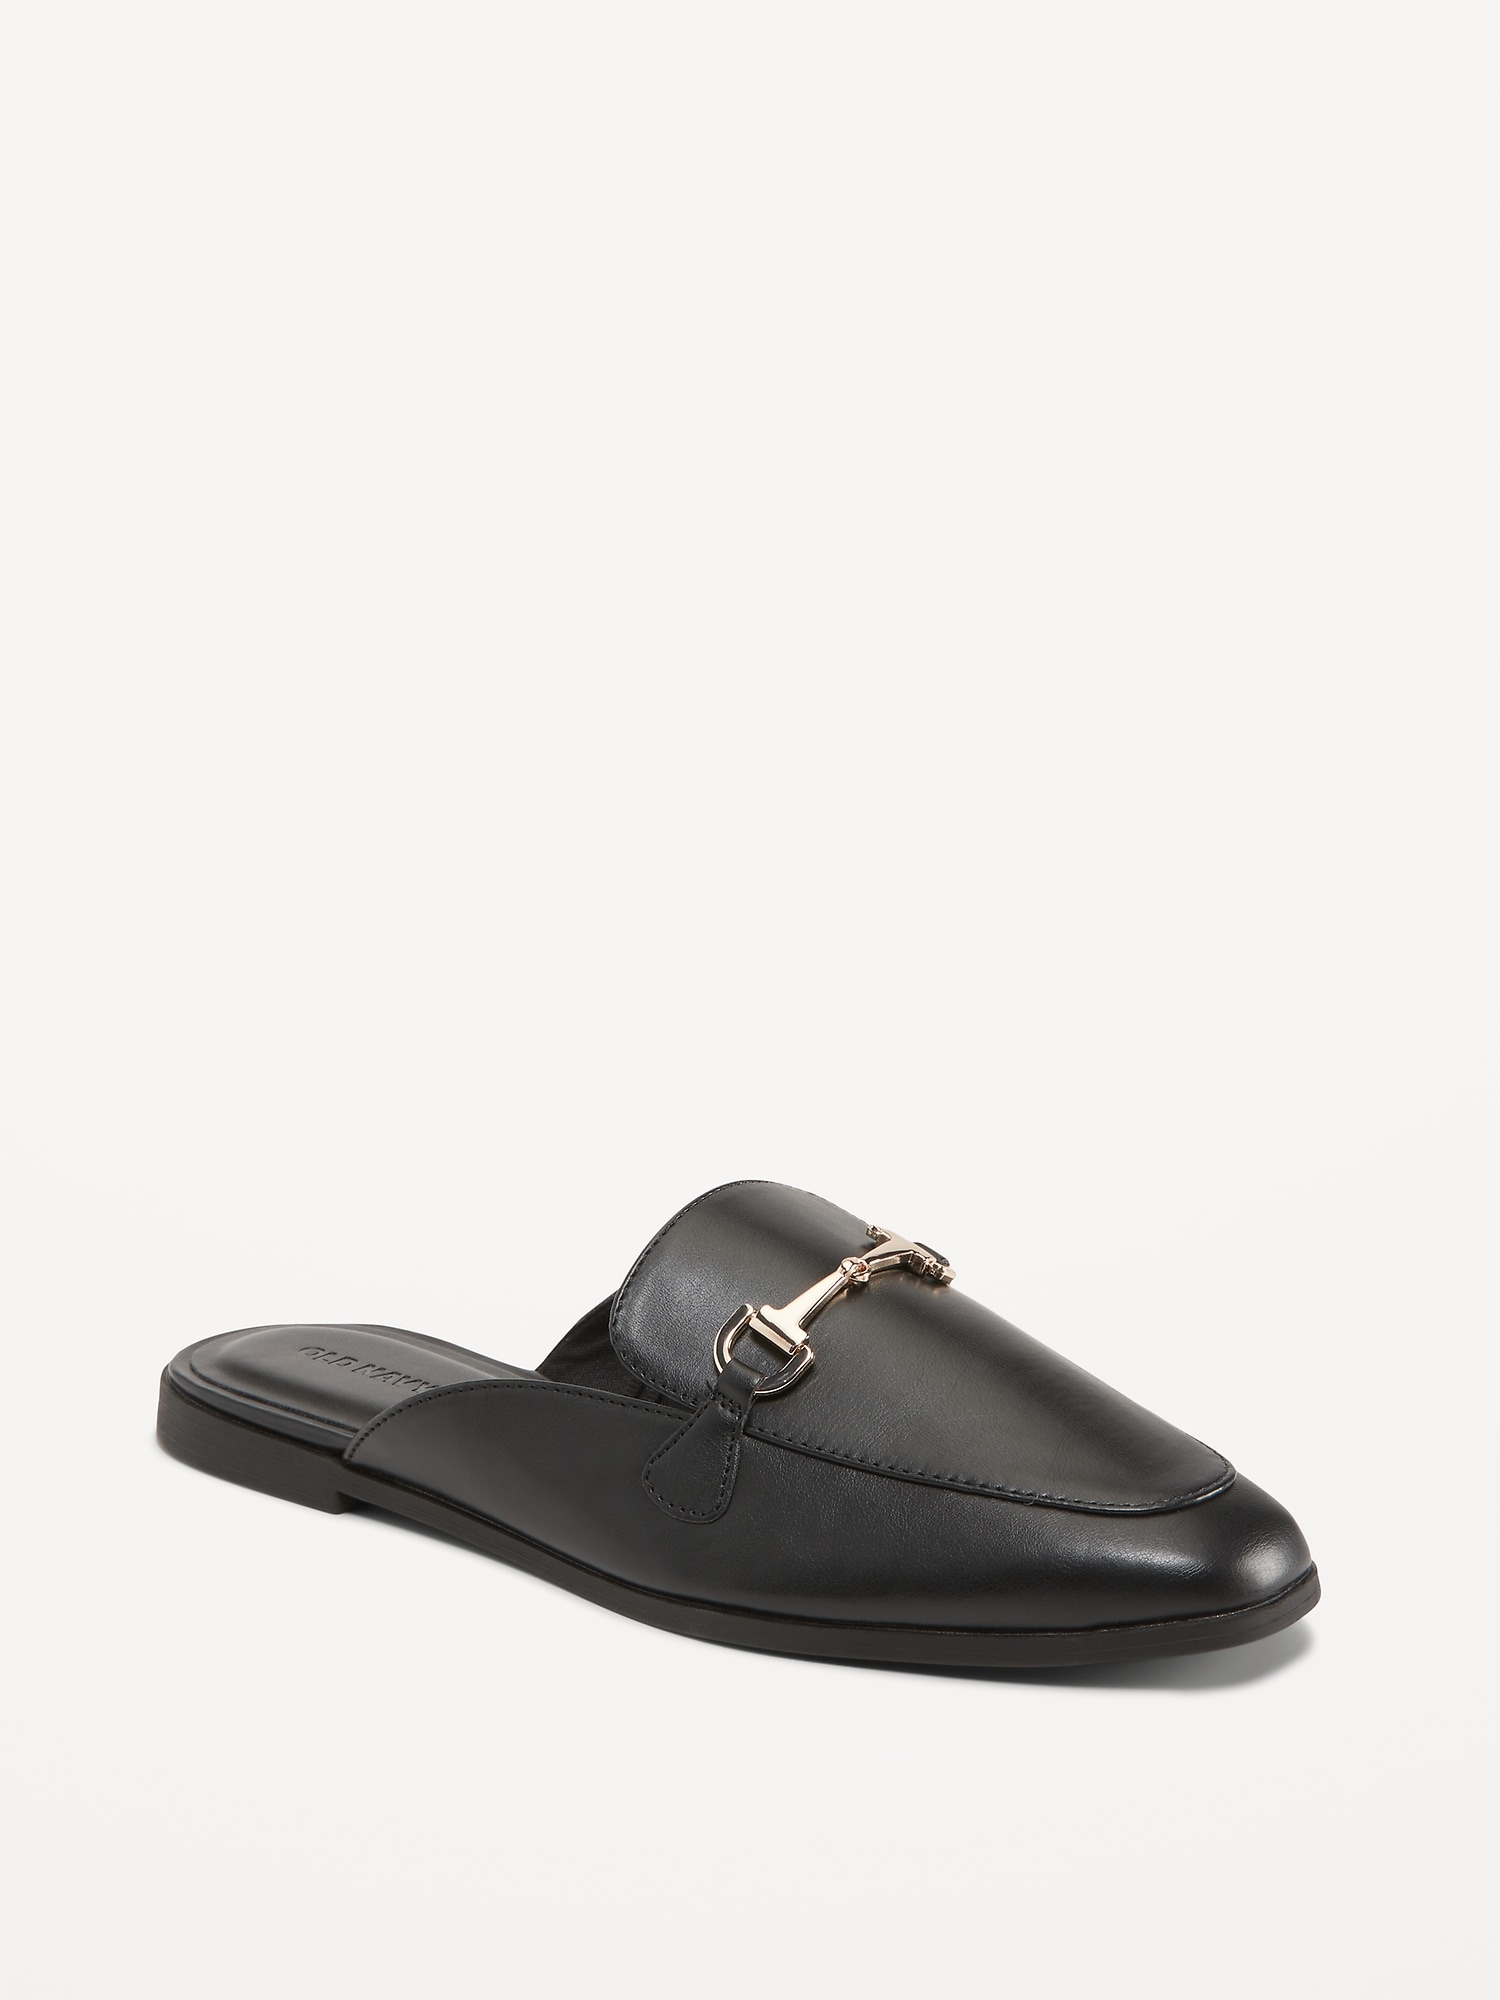 Faux-Leather Loafer Mule Shoes